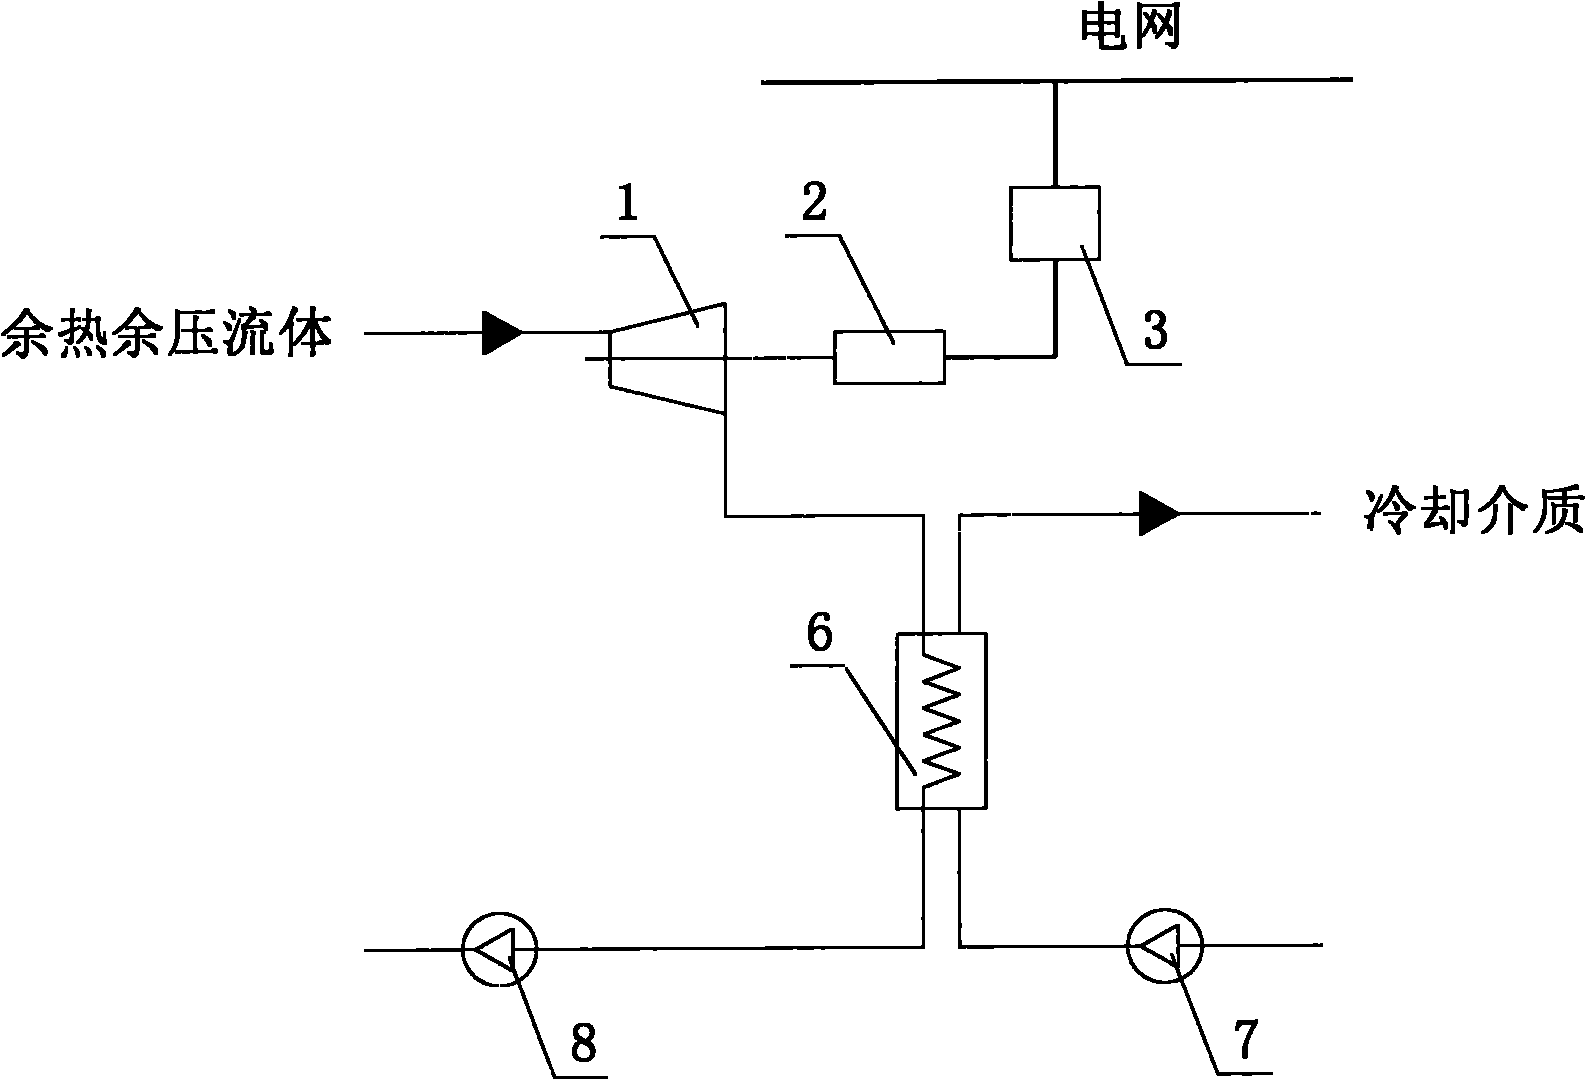 Distributed type residual-heat/residual-pressure power generation system and distributed type residual-heat/residual-pressure power generation method